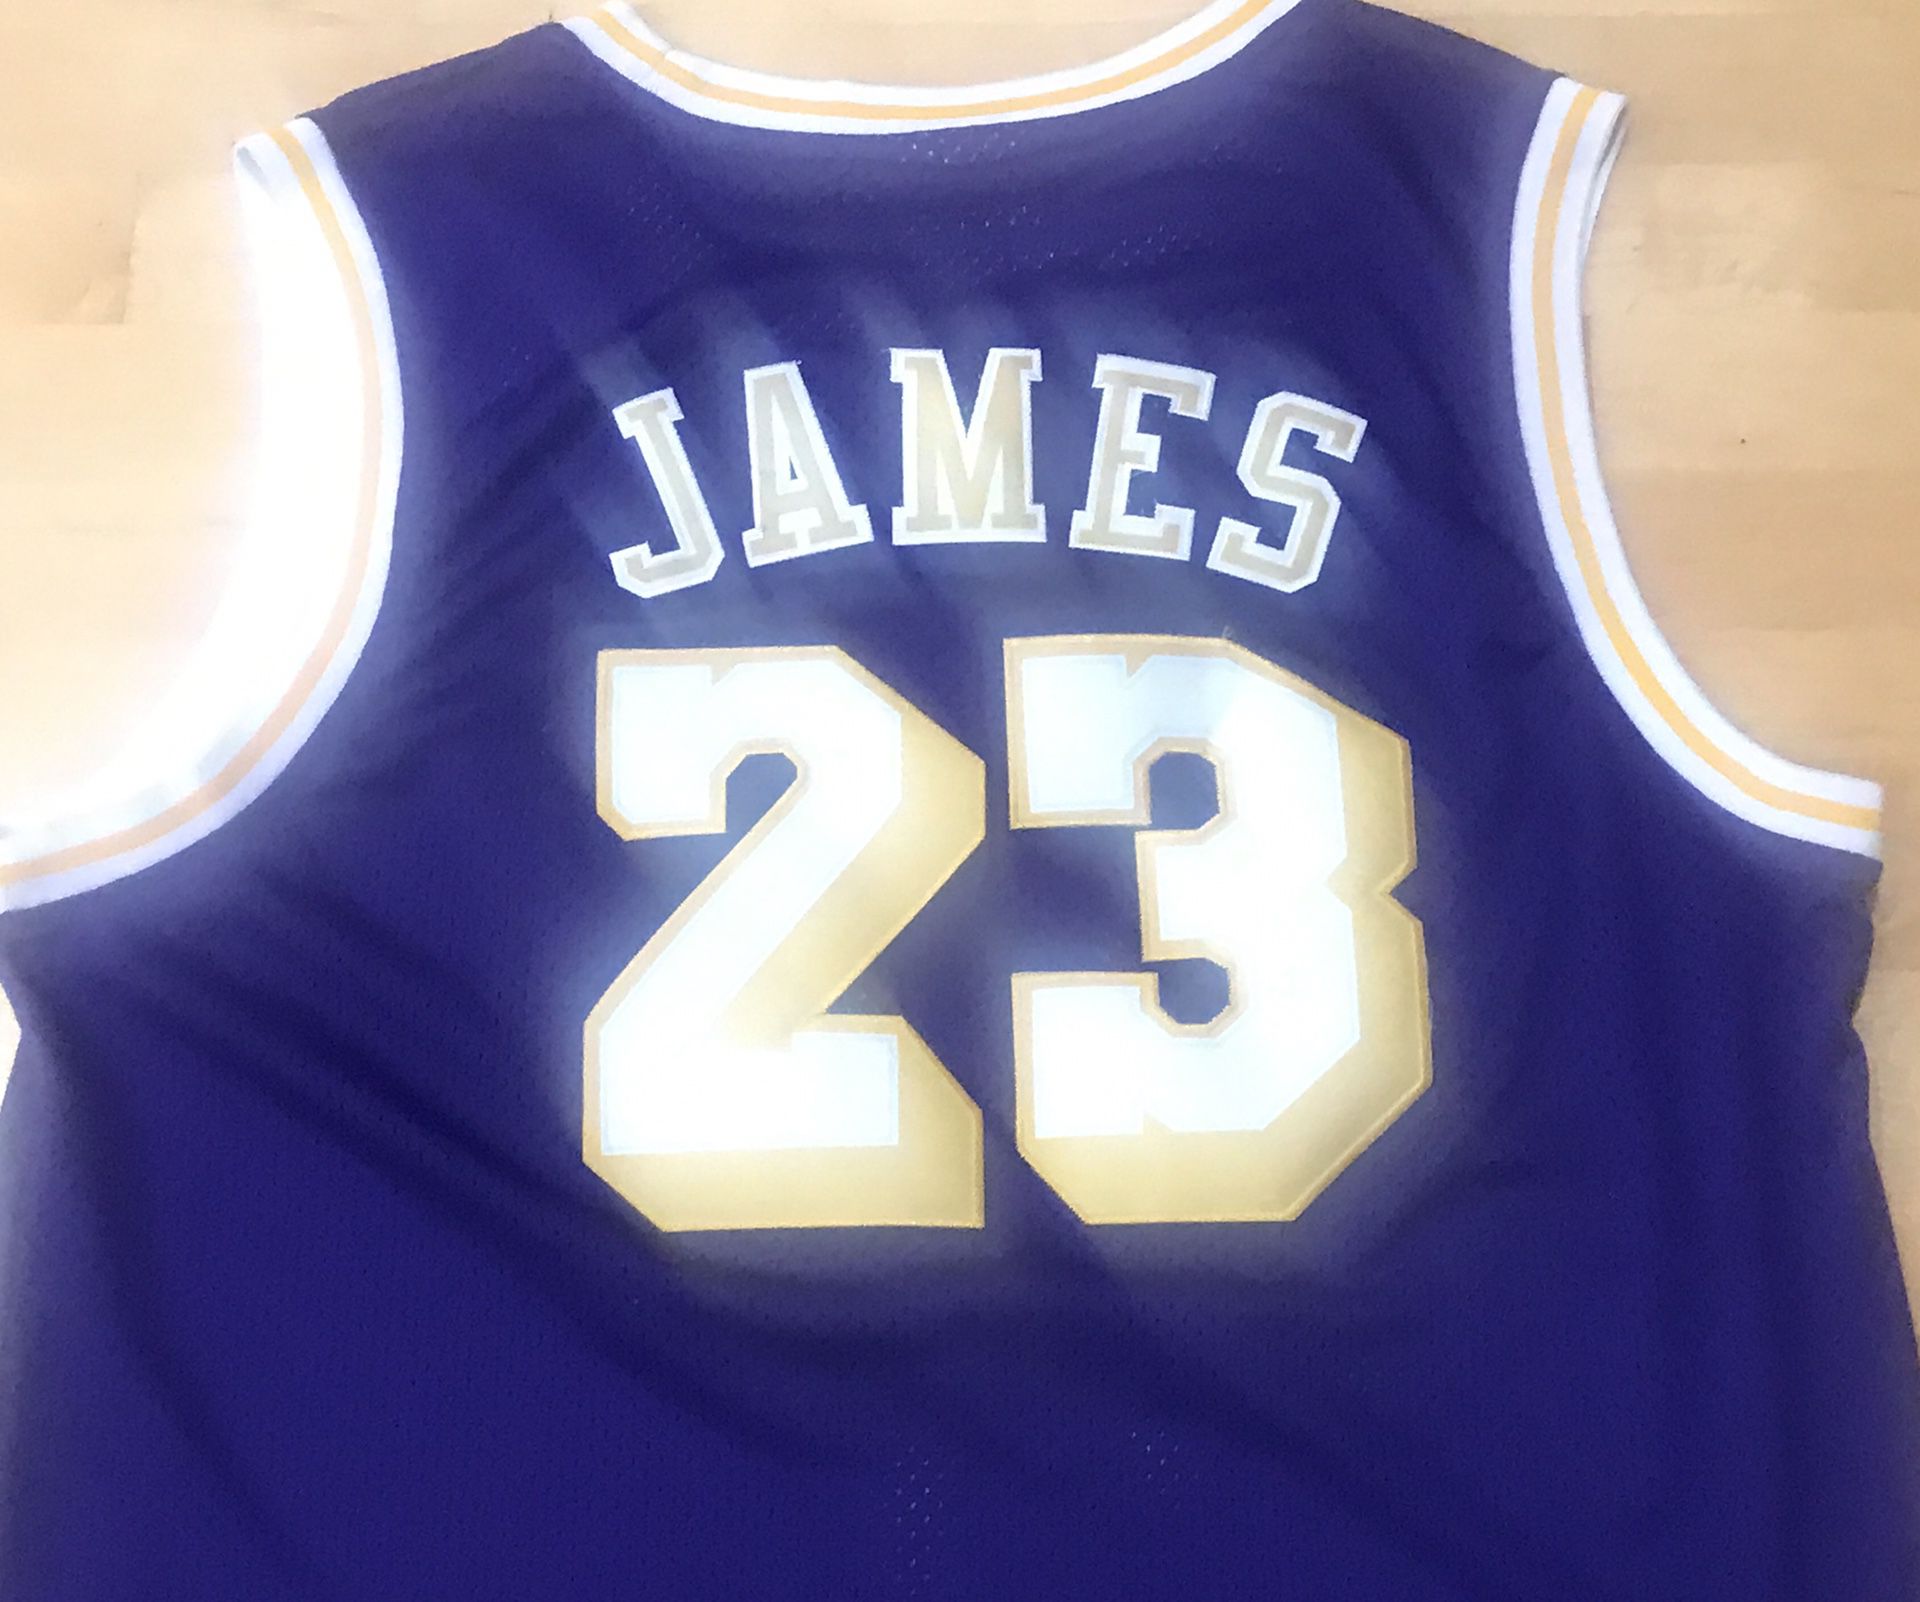 LeBron James Lakers Purple With Black And Gold Jersey! for Sale in Vero  Beach, FL - OfferUp